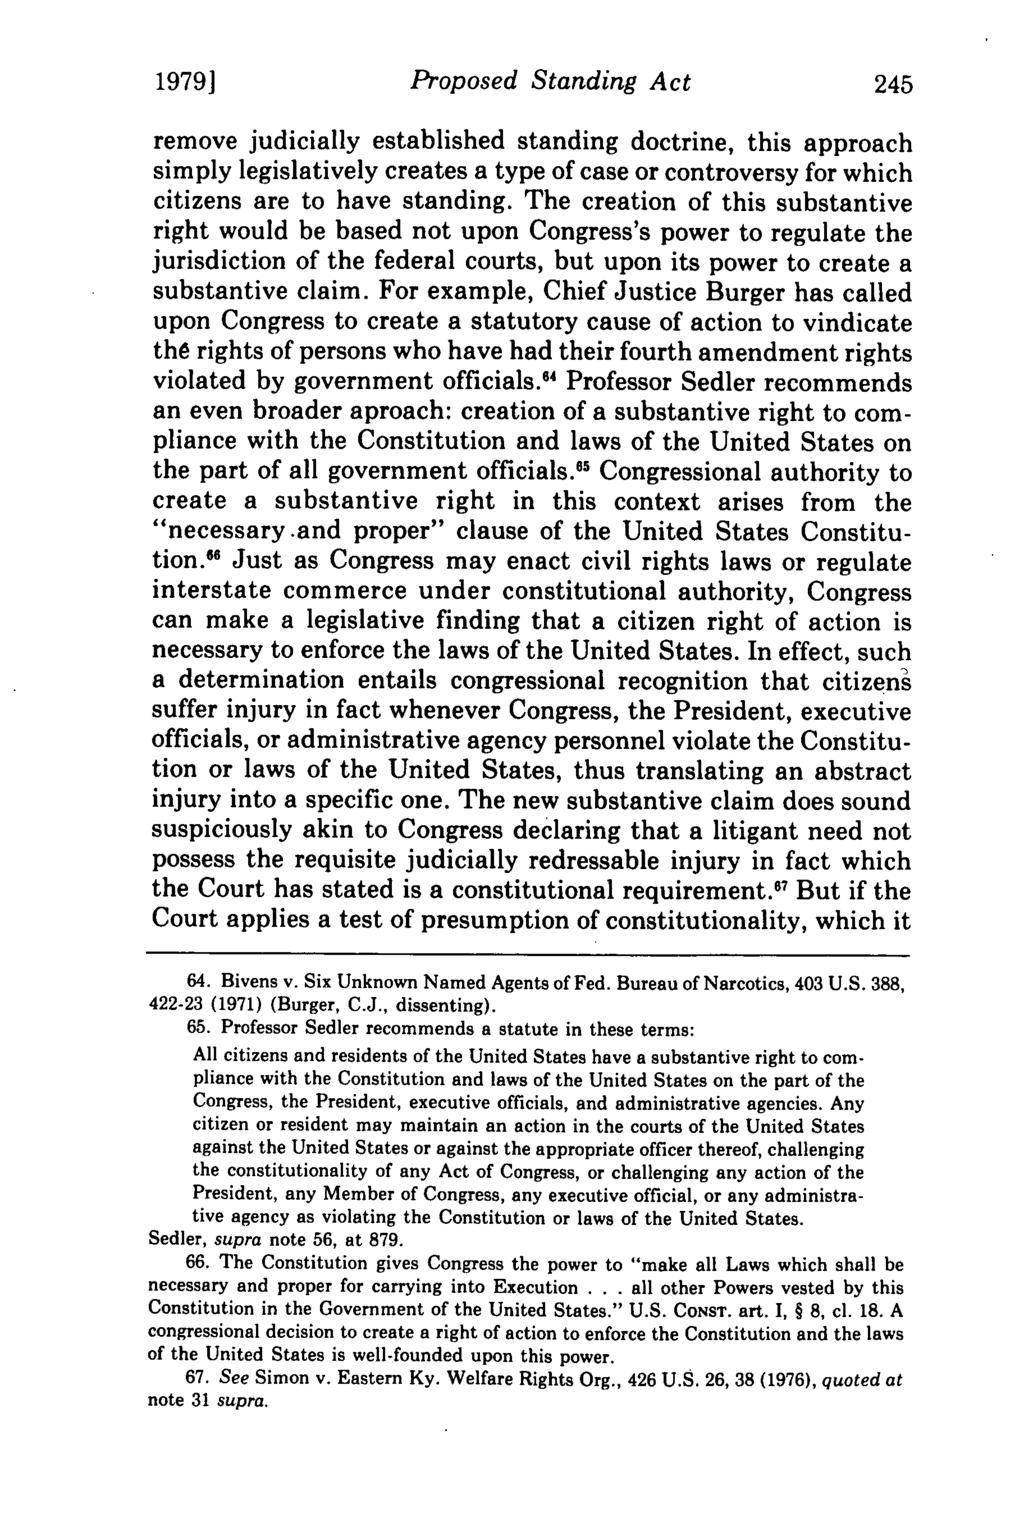 1979] Proposed Standing Act remove judicially established standing doctrine, this approach simply legislatively creates a type of case or controversy for which citizens are to have standing.